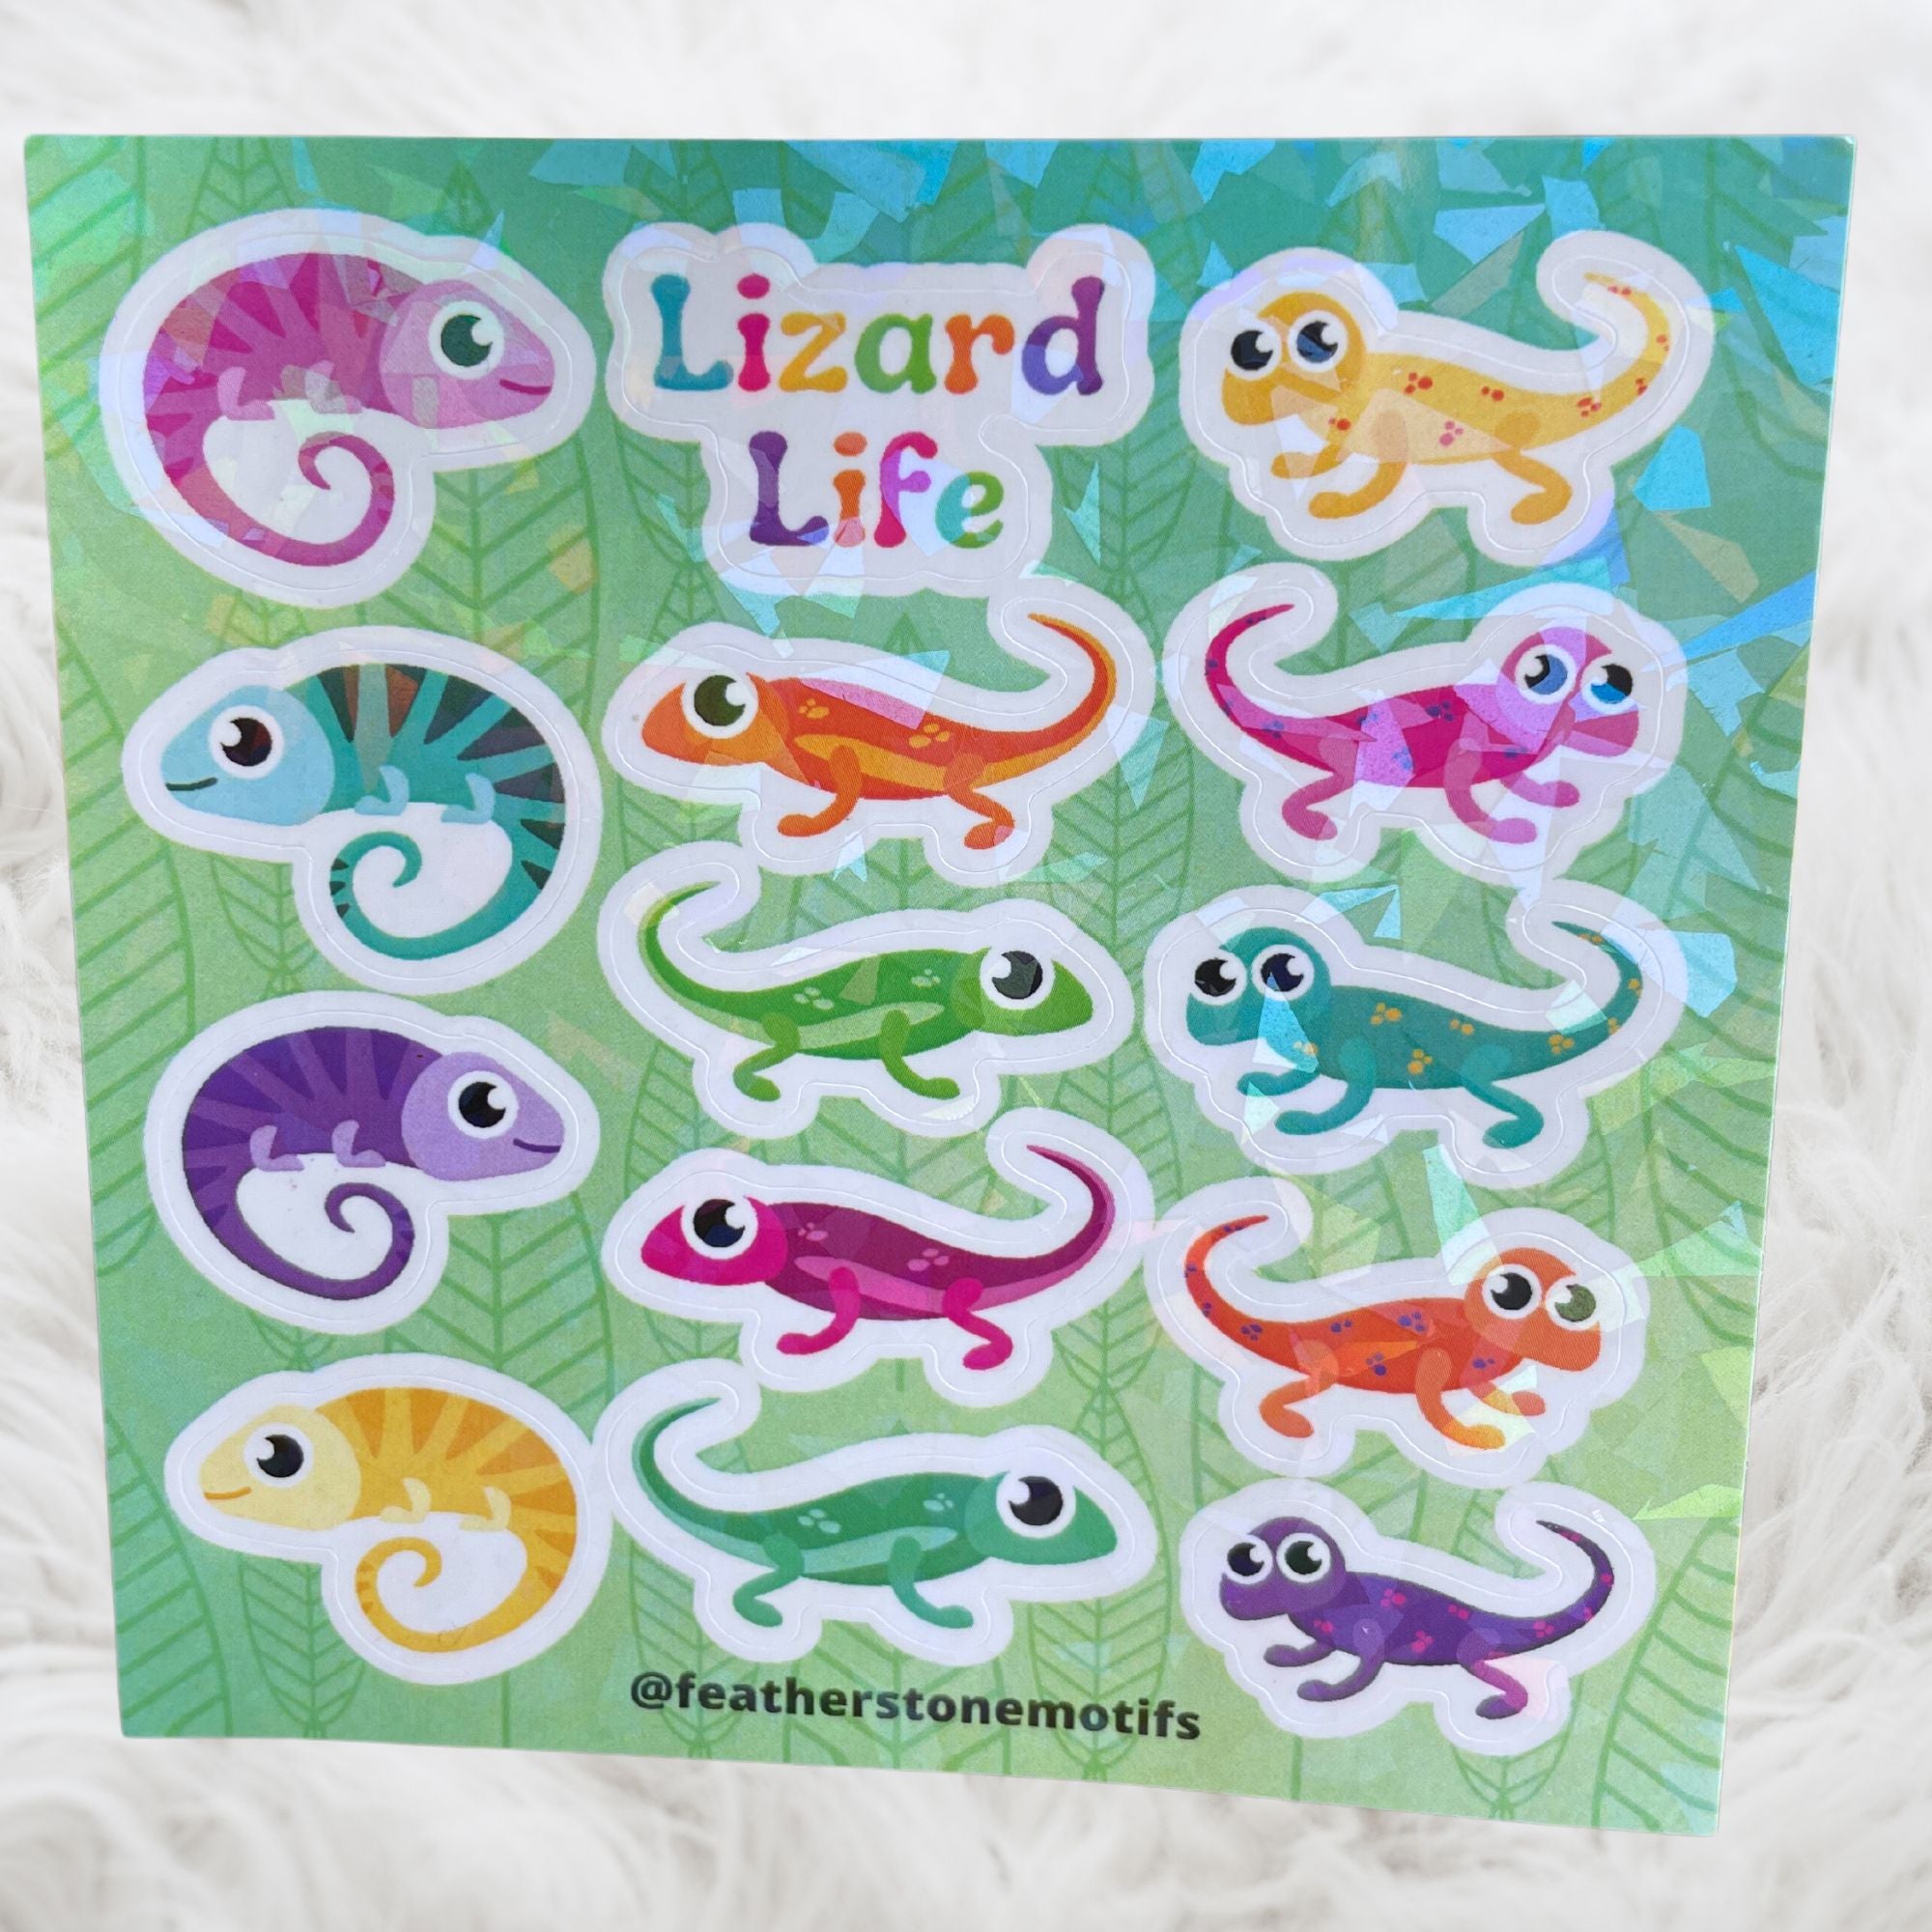 This image shows the Lizard Life mini sheet with crackle overlay